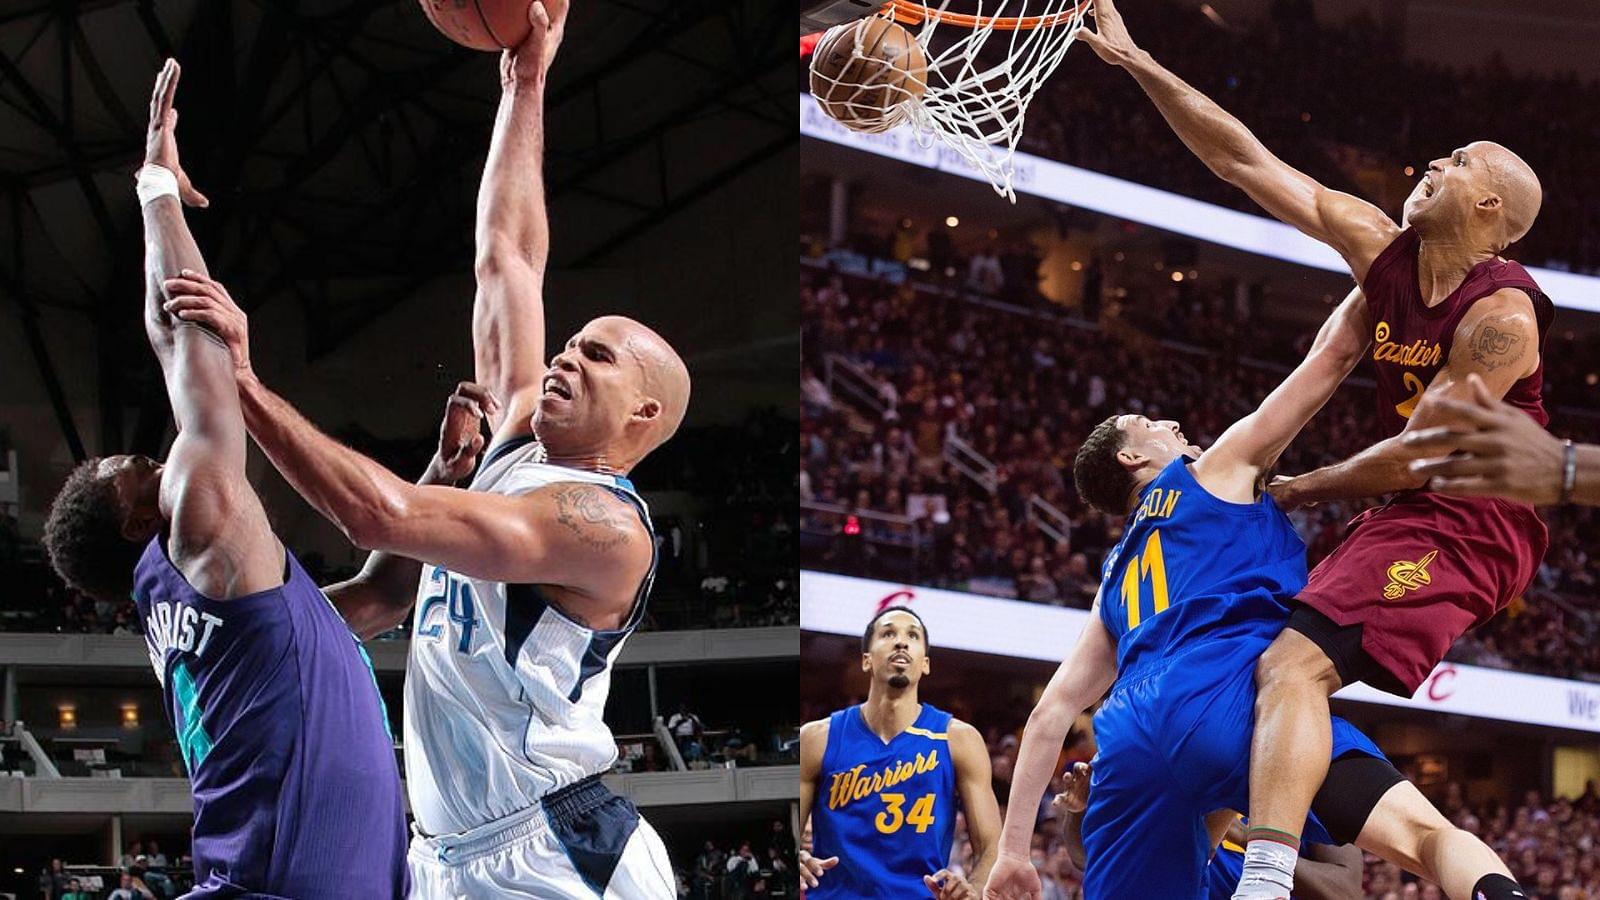 “Richard Jefferson had some nasty, disrespectful dunks against Kobe Bryant, LeBron James and more”: NBA Twitter gives flowers to one of the most complete and underrated players of 2000s